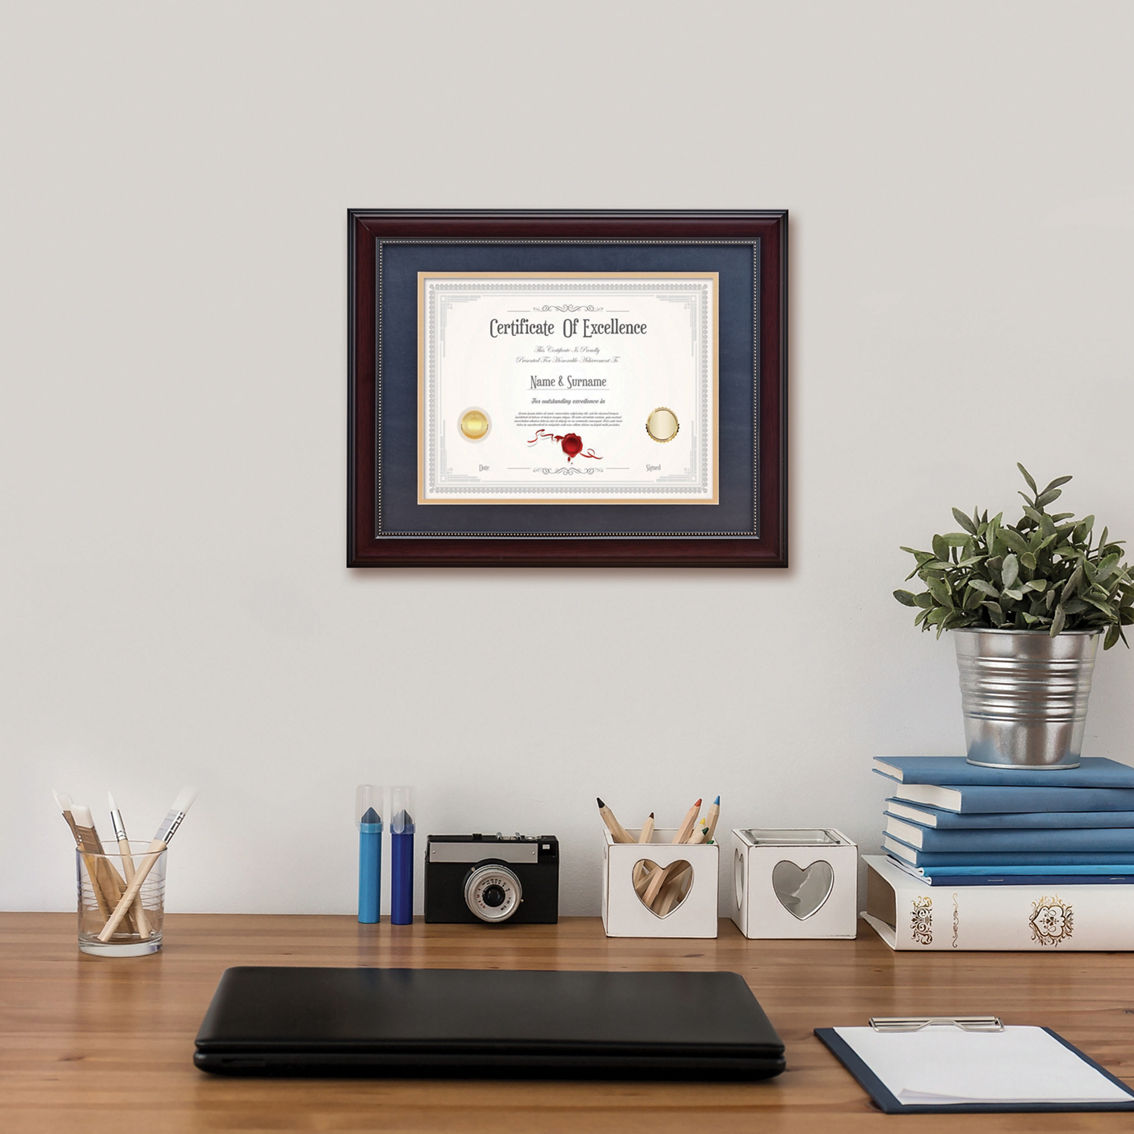 Melannco 8.5 x 11 in. Certificate Wood Frame with Navy Mat - Image 2 of 3